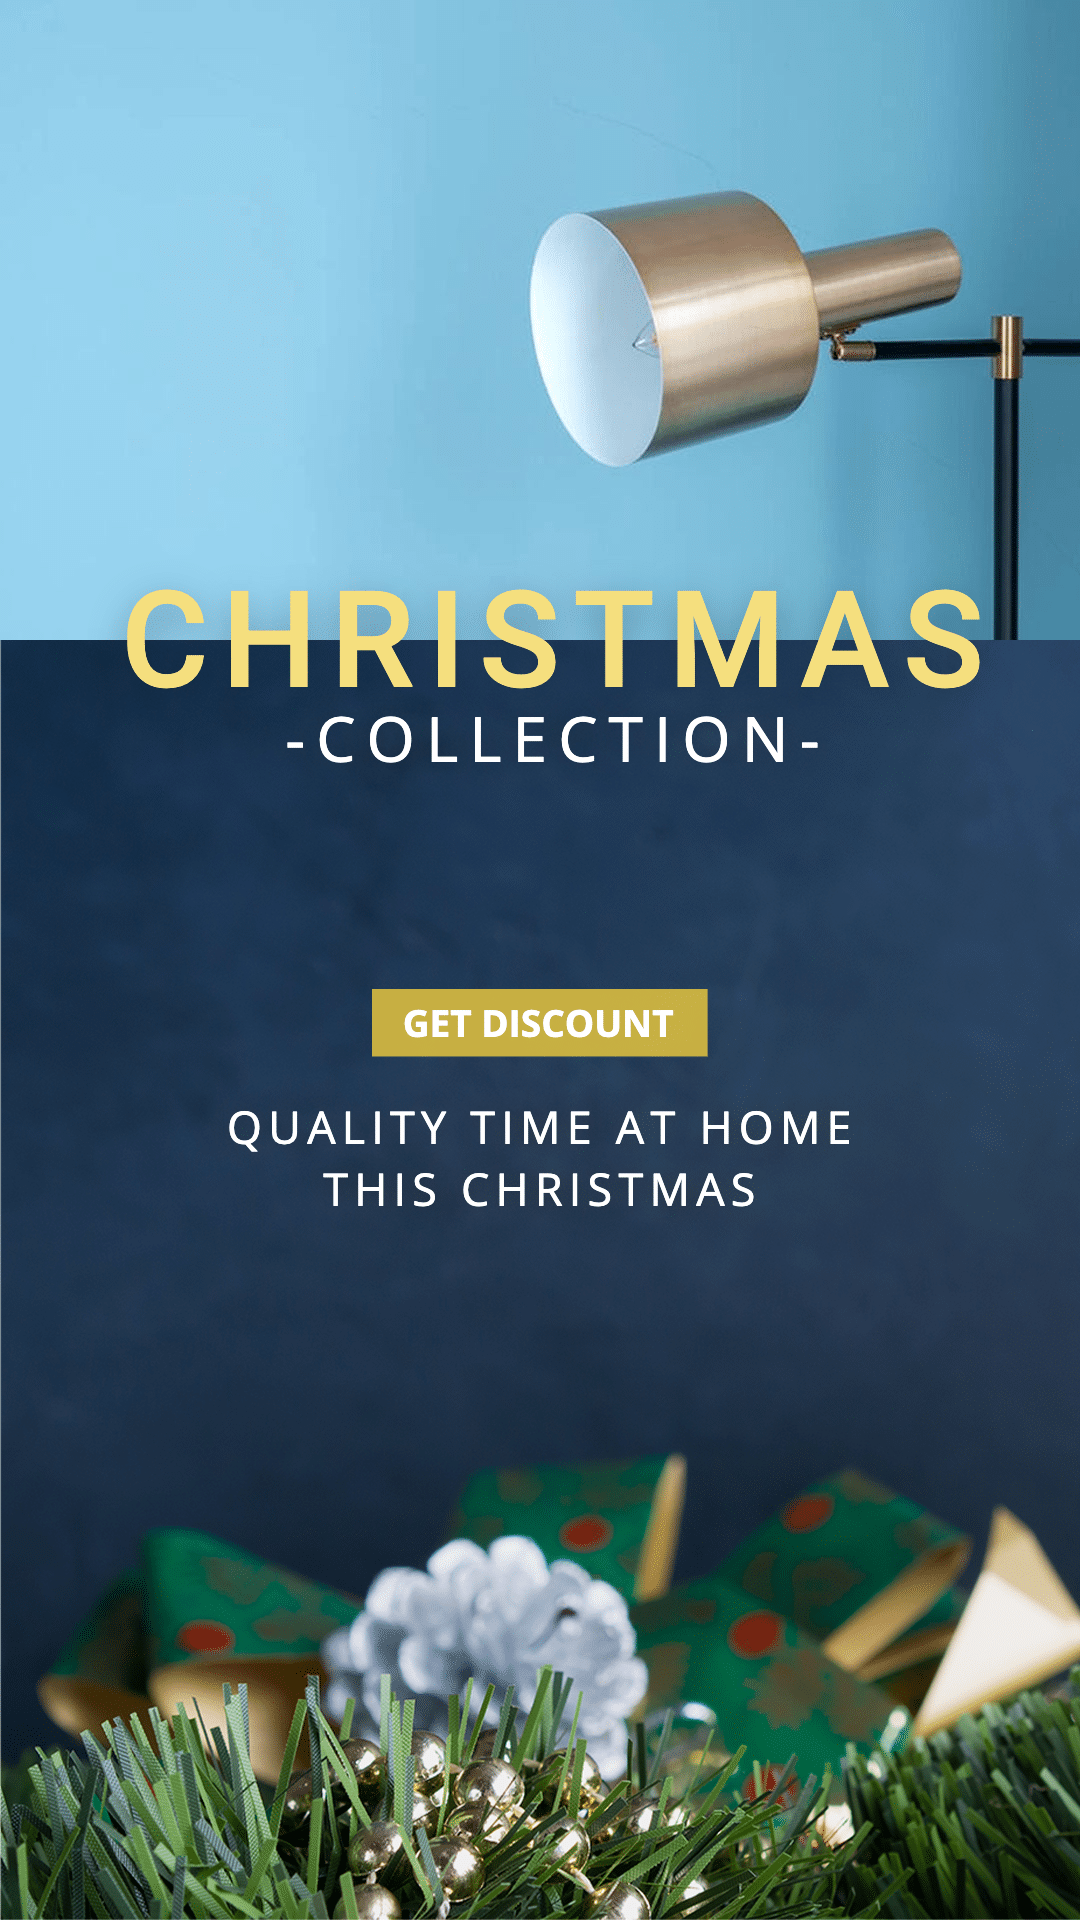 Christmas Decoration Furniture Promotion Template Poster Ecommerce Story预览效果